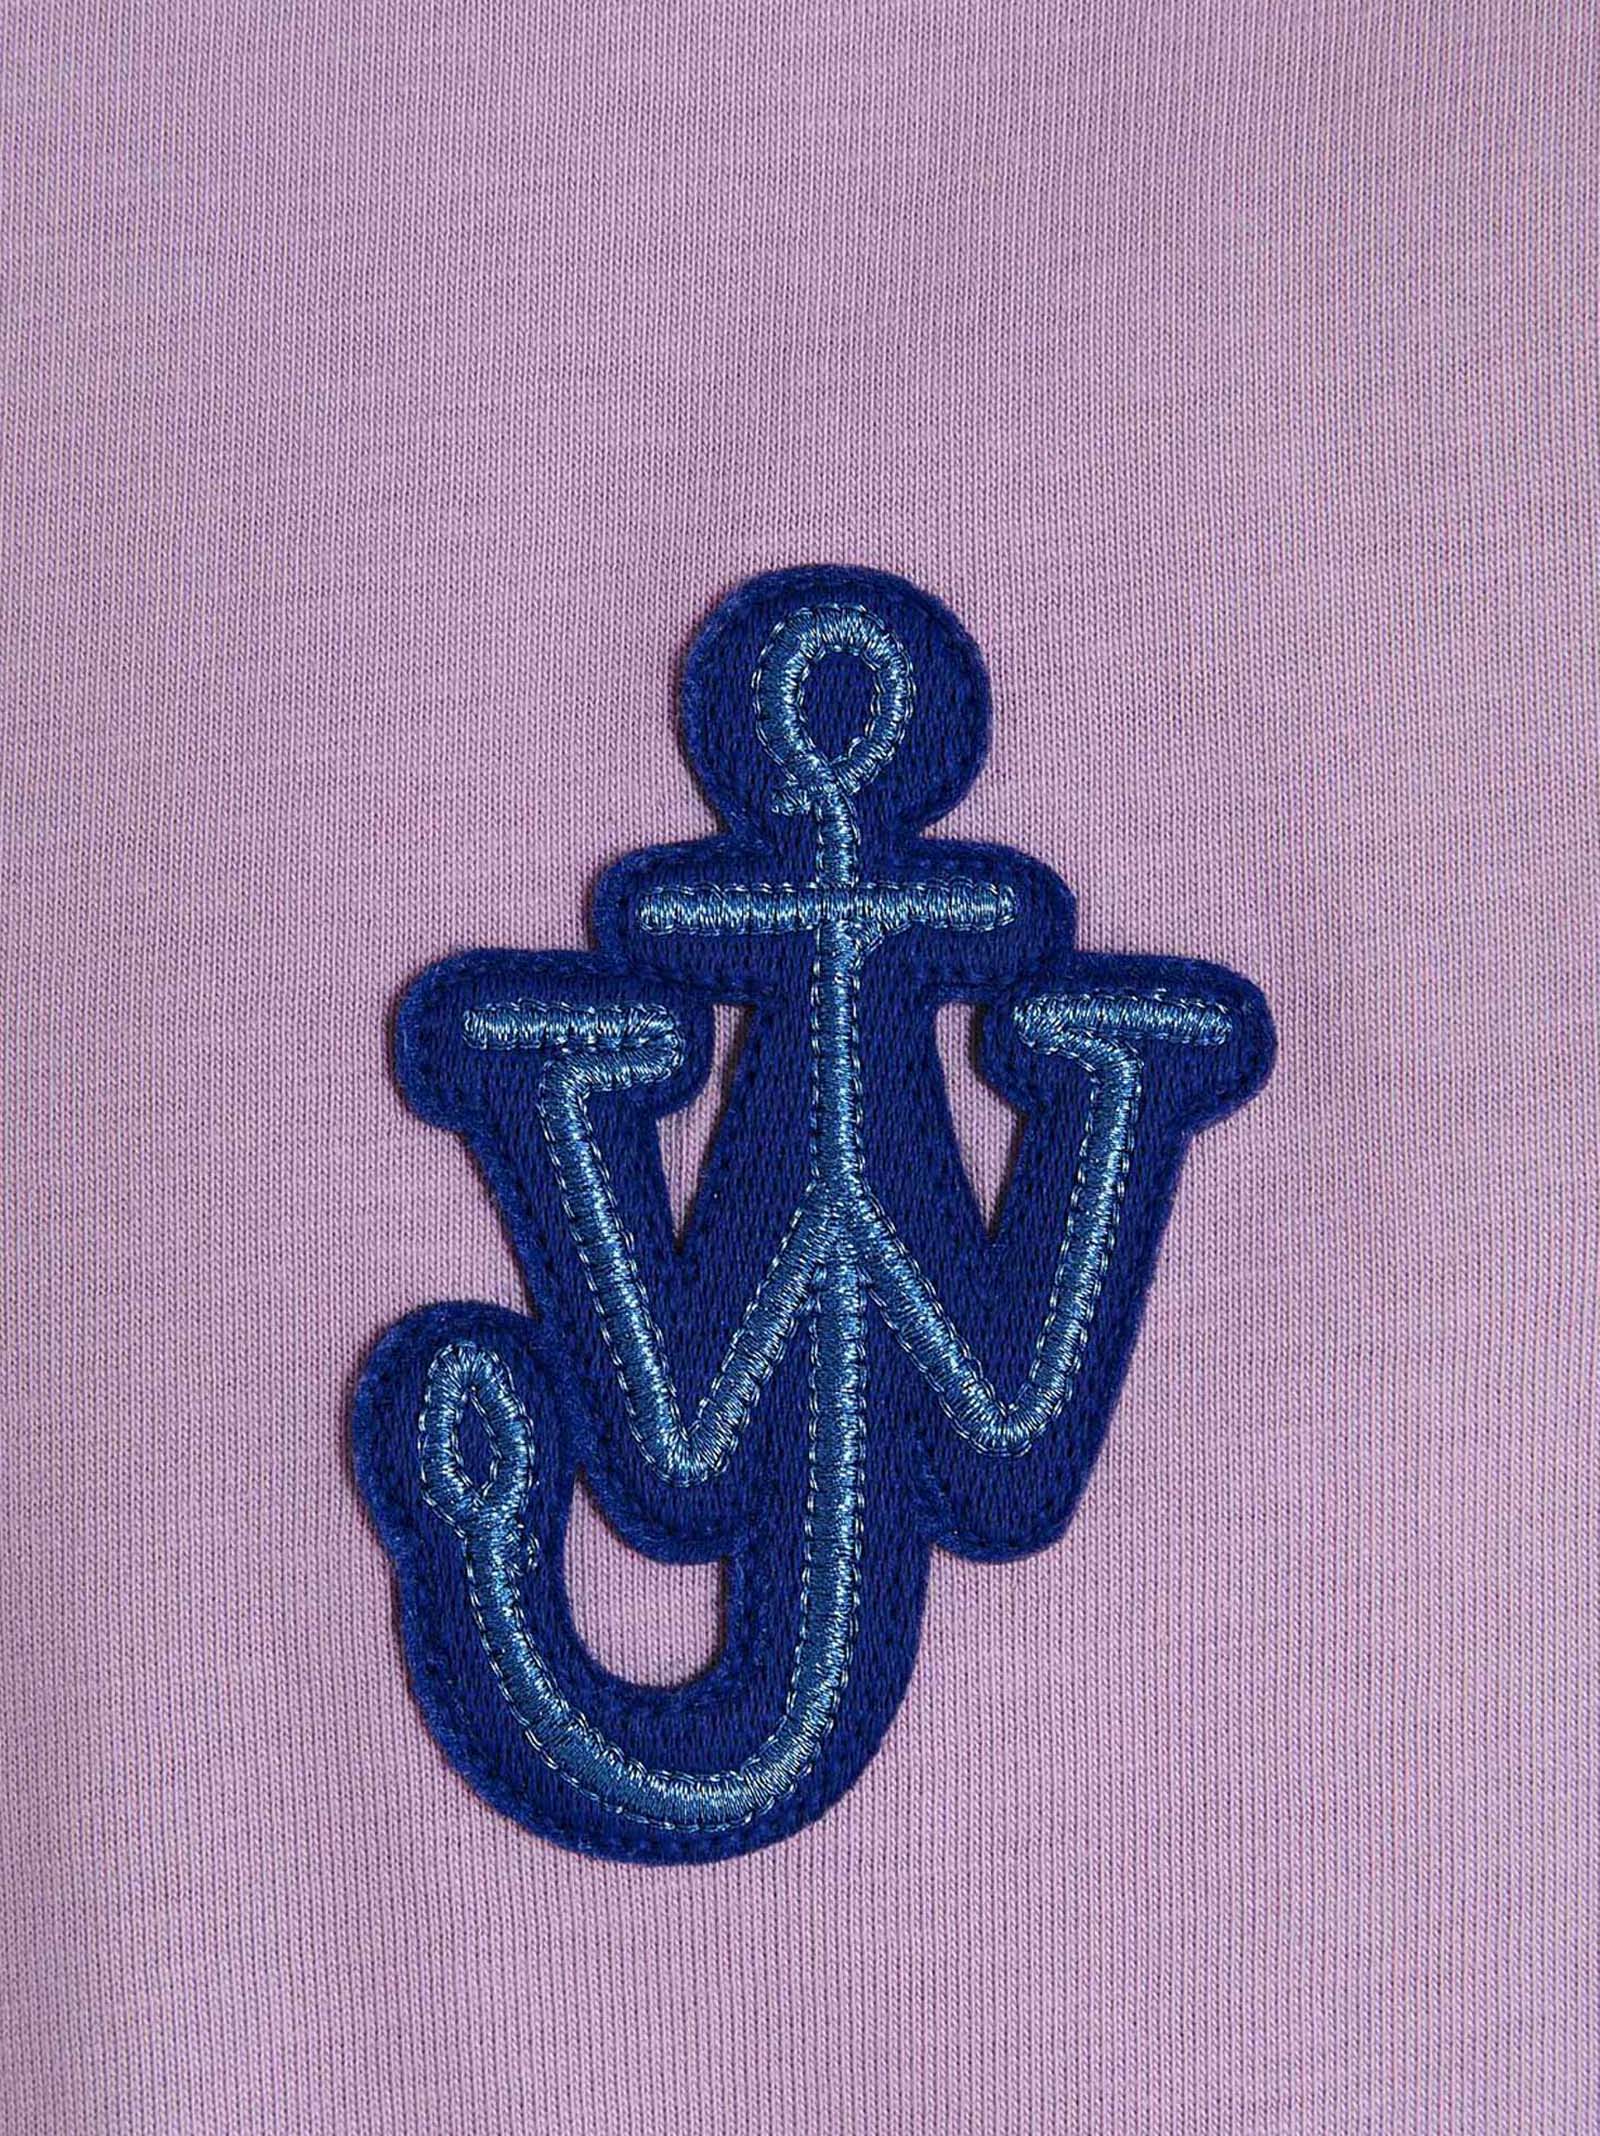 Shop Jw Anderson Anchor T-shirt In Purple